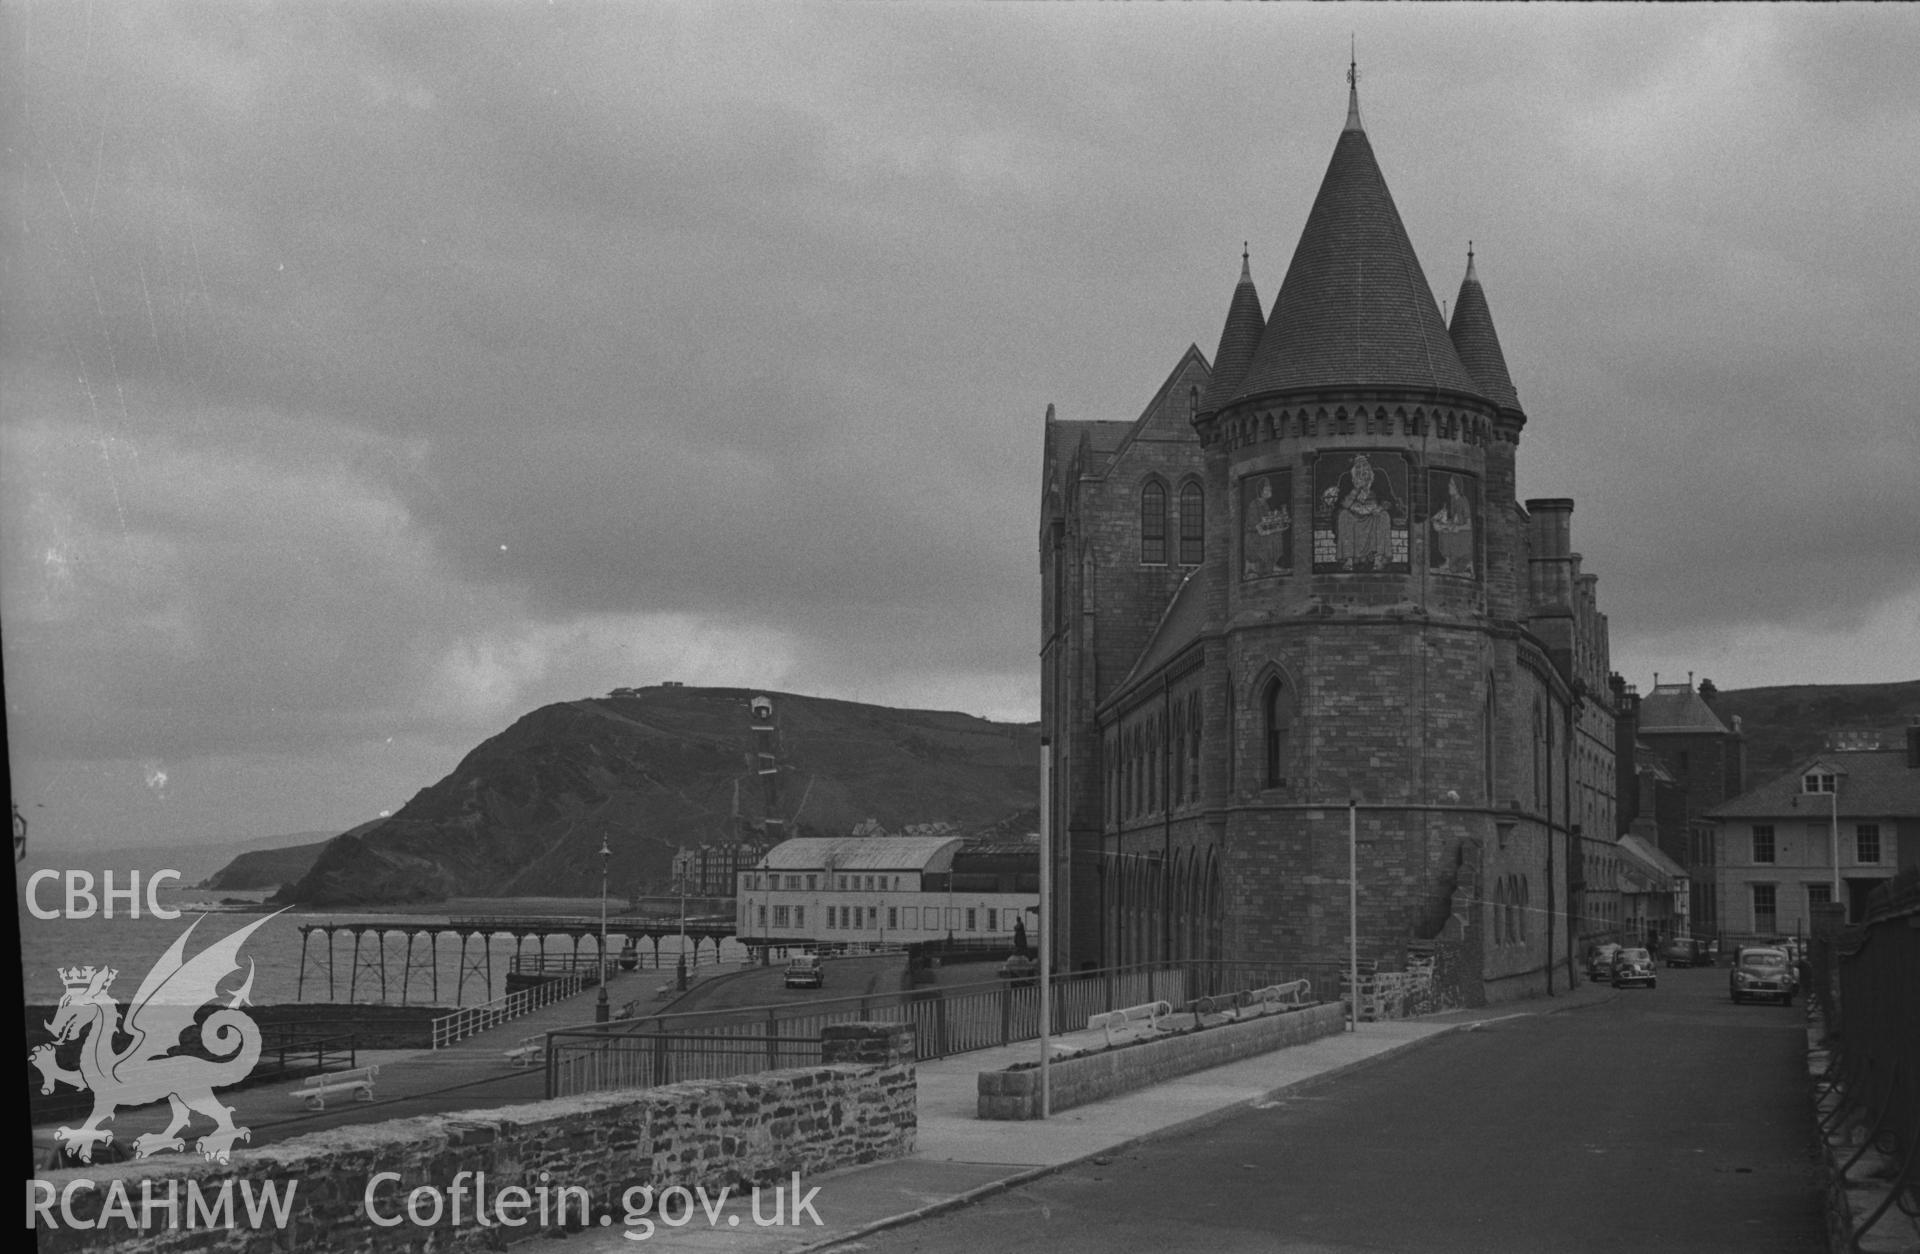 Black and White photograph showing Old College, Constitution hill, King Street and the sea front, Aberystwyth. Photographed by Arthur Chater in March 1961 from Grid Reference SN 5800 8160, looking north east.